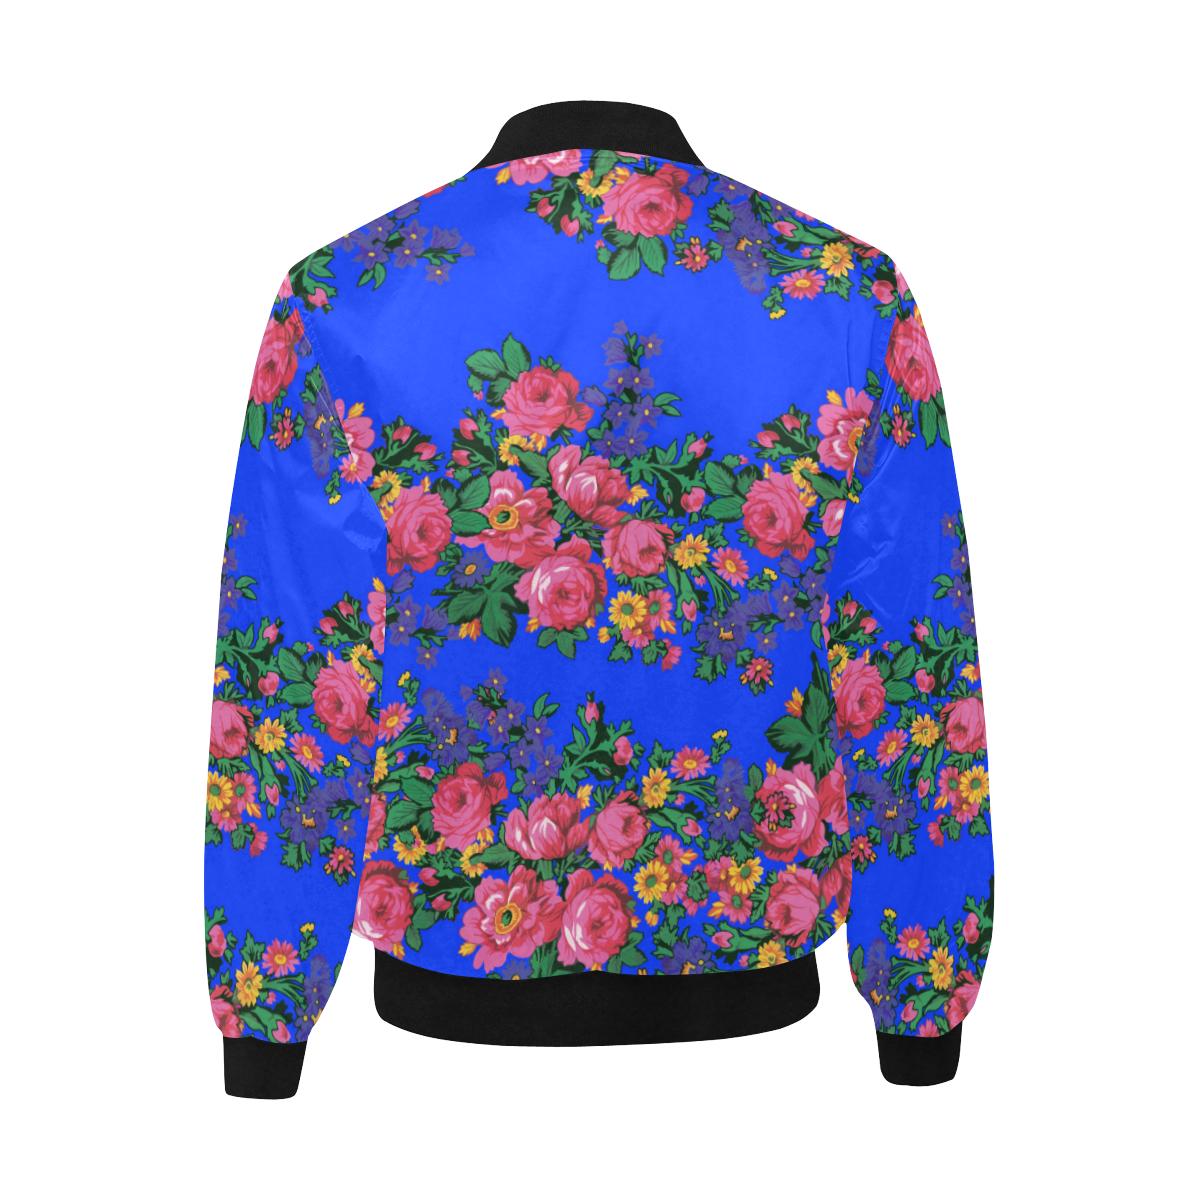 Kokum's Revenge- Royal Unisex Heavy Bomber Jacket with Quilted Lining All Over Print Quilted Jacket for Men (H33) e-joyer 